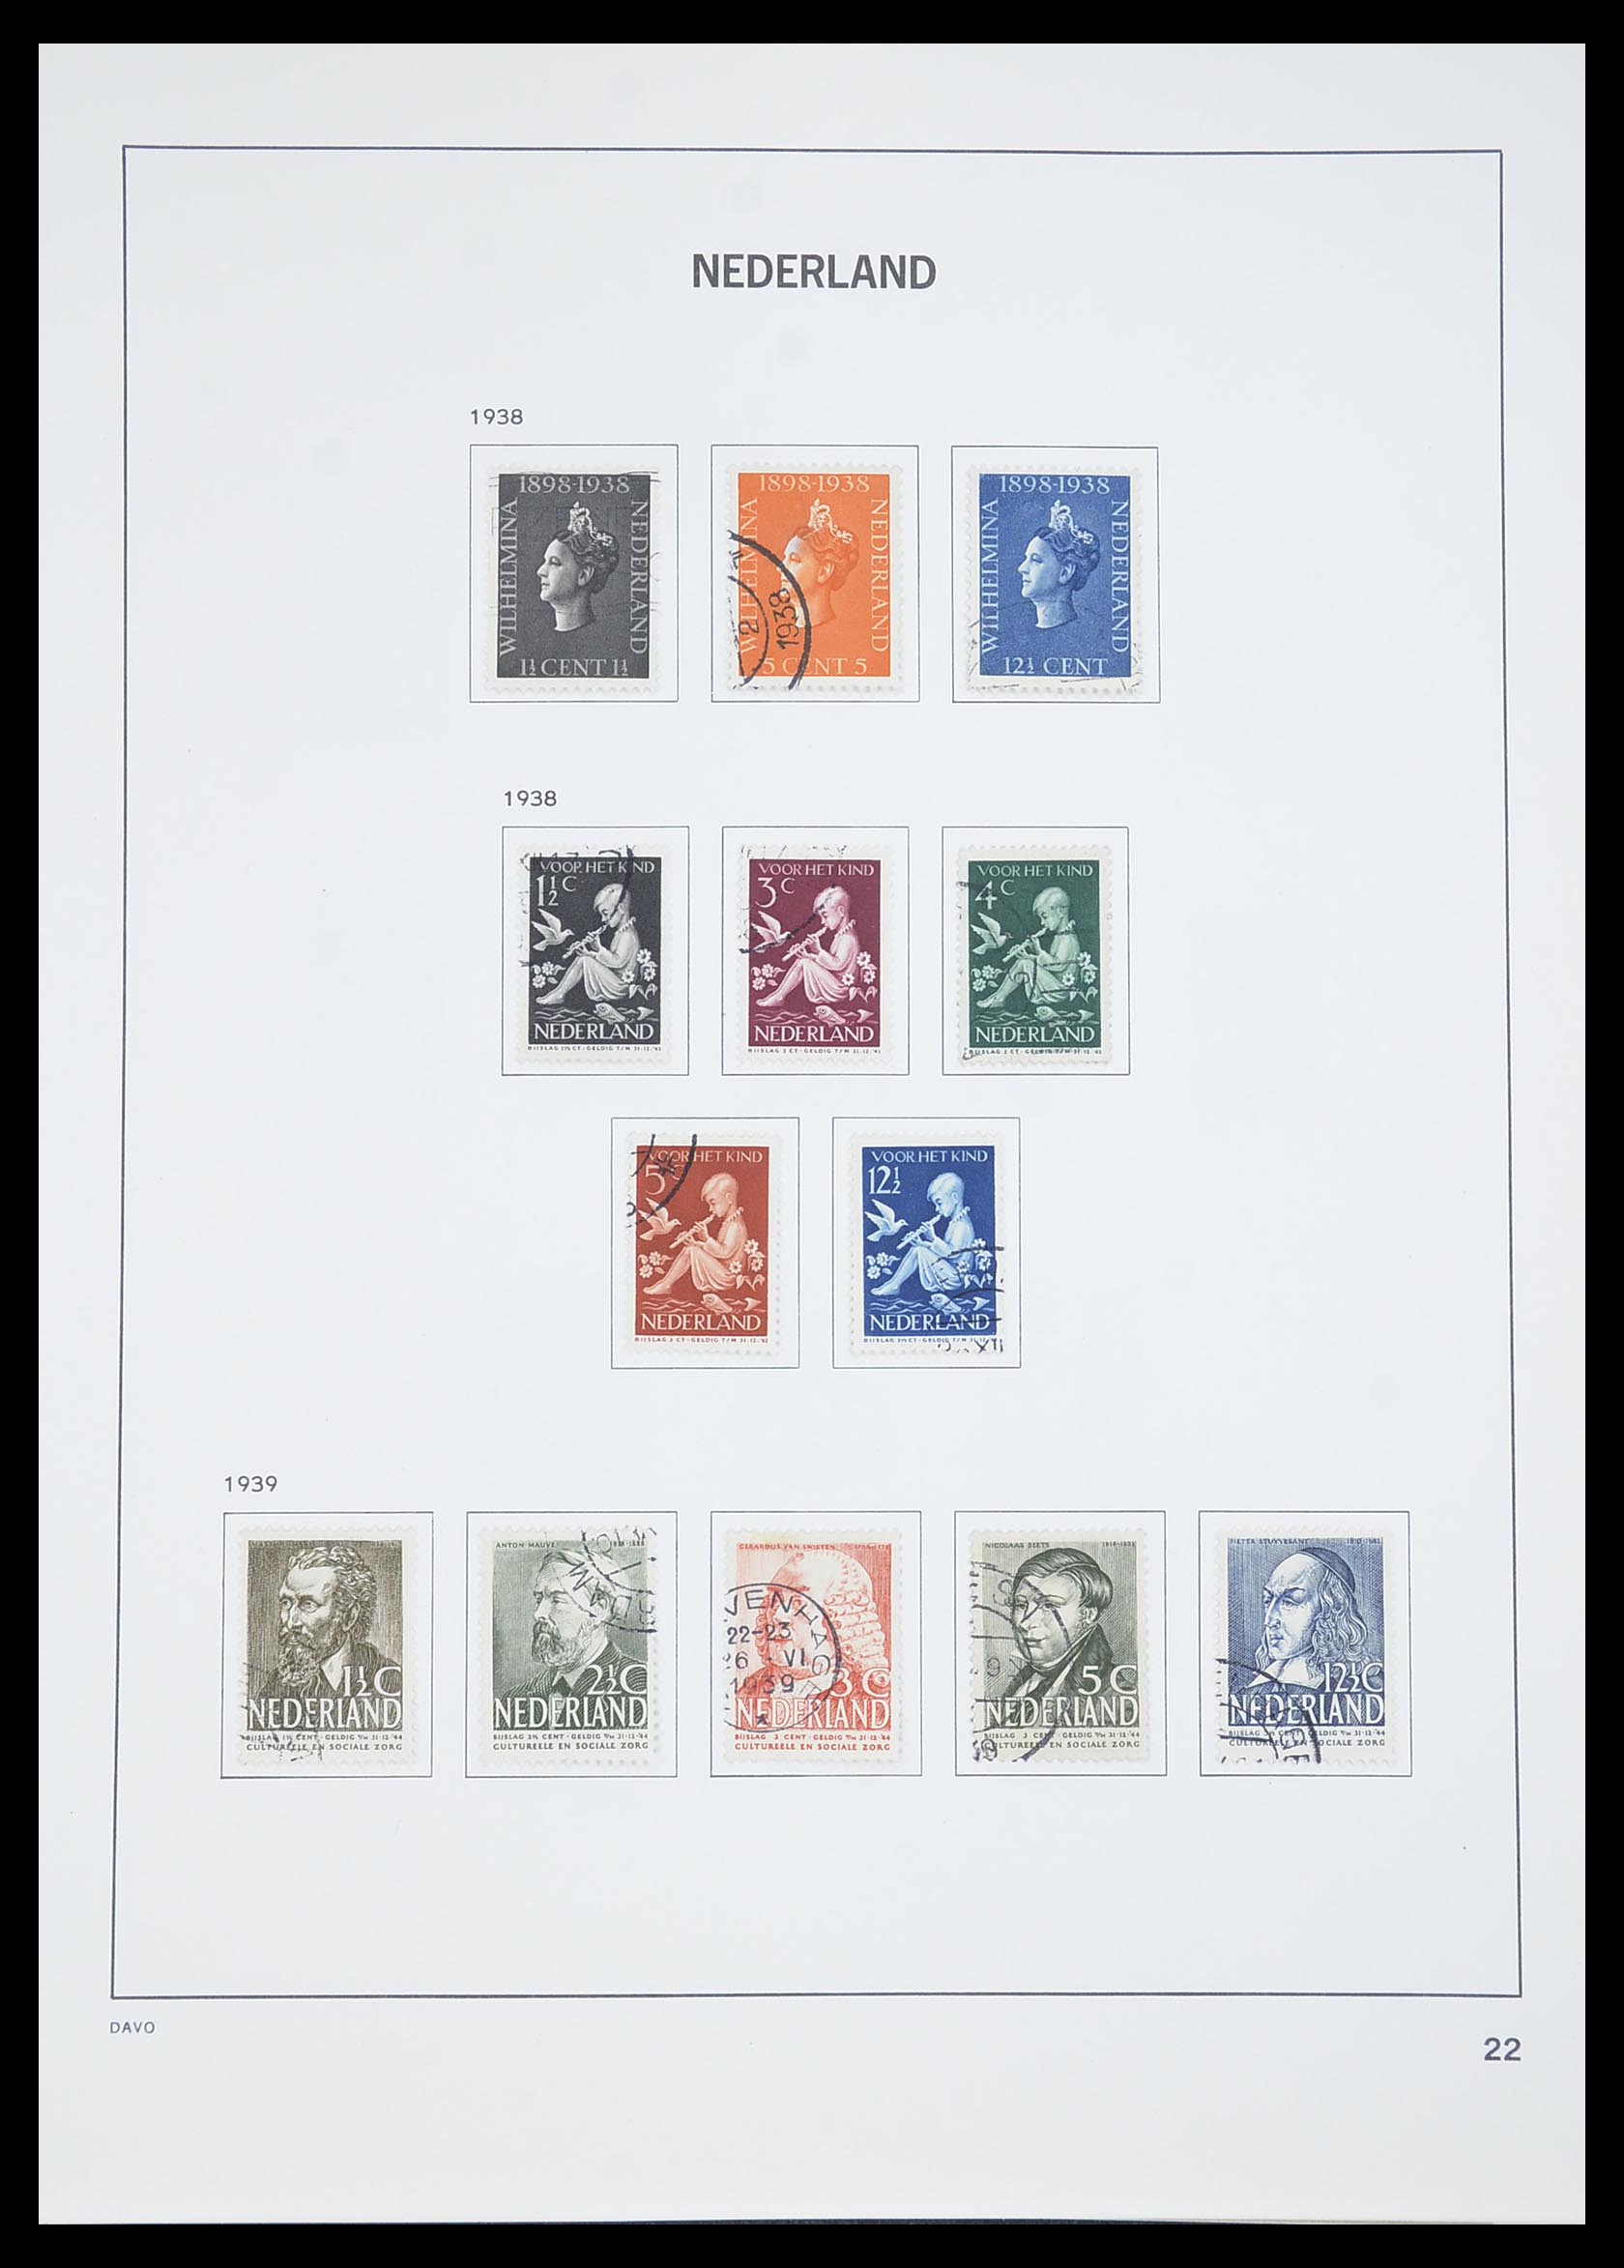 33605 072 - Stamp collection 33605 Netherlands 1852-1944.